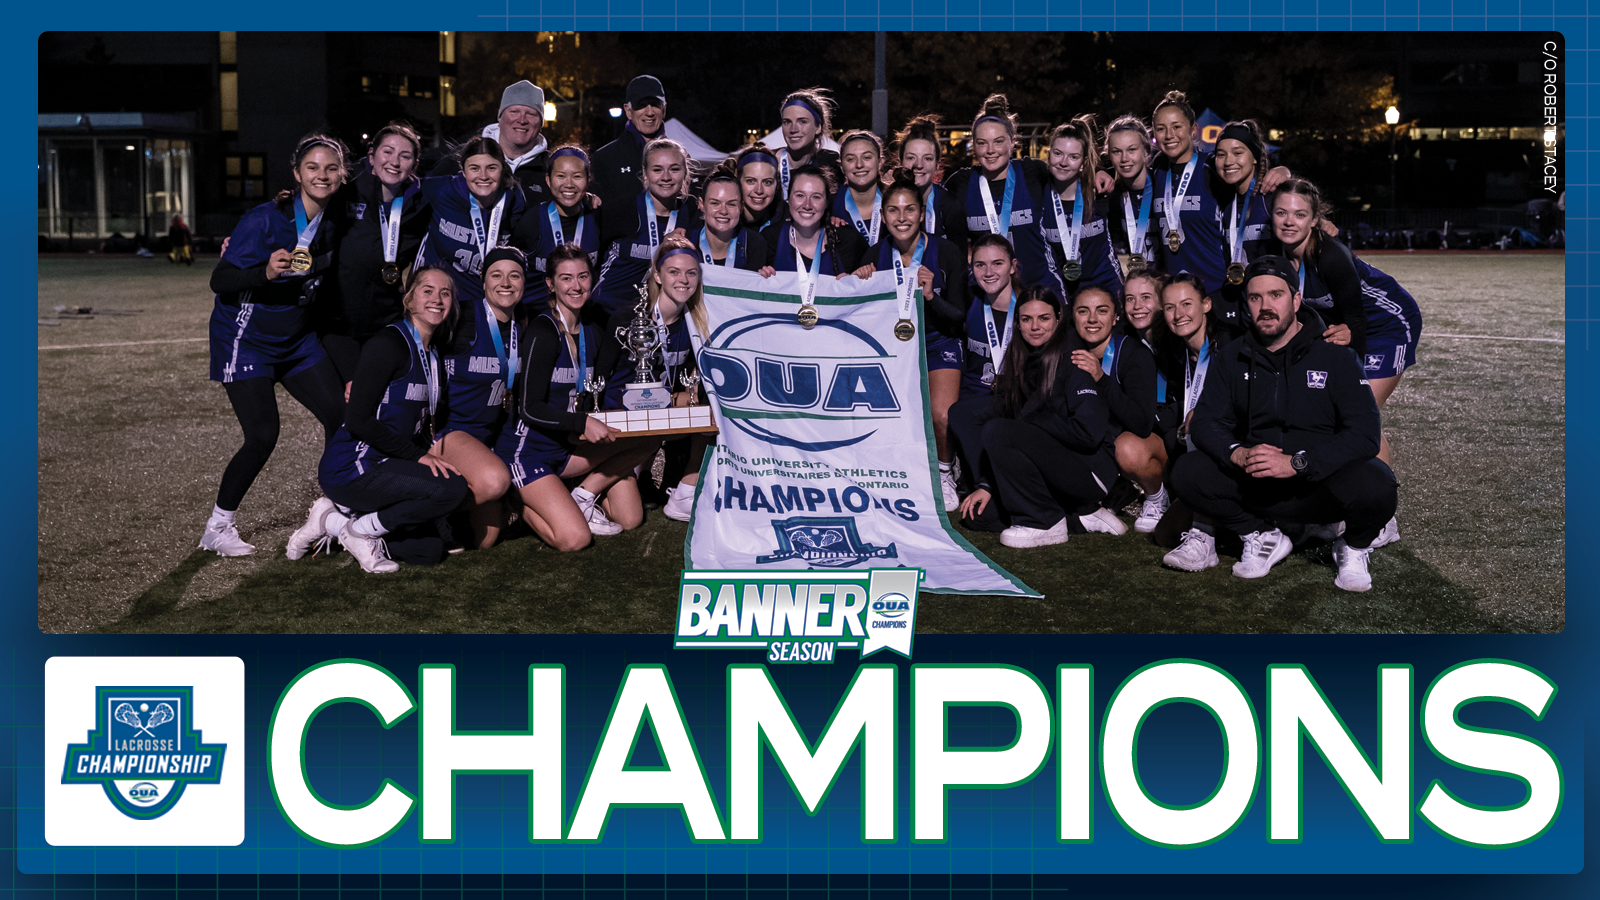 Graphic on predominantly blue background feature banner photo of Western women's lacrosse team, with large white text that reads 'Champions' and the OUA Lacrosse Championship logo underneath them